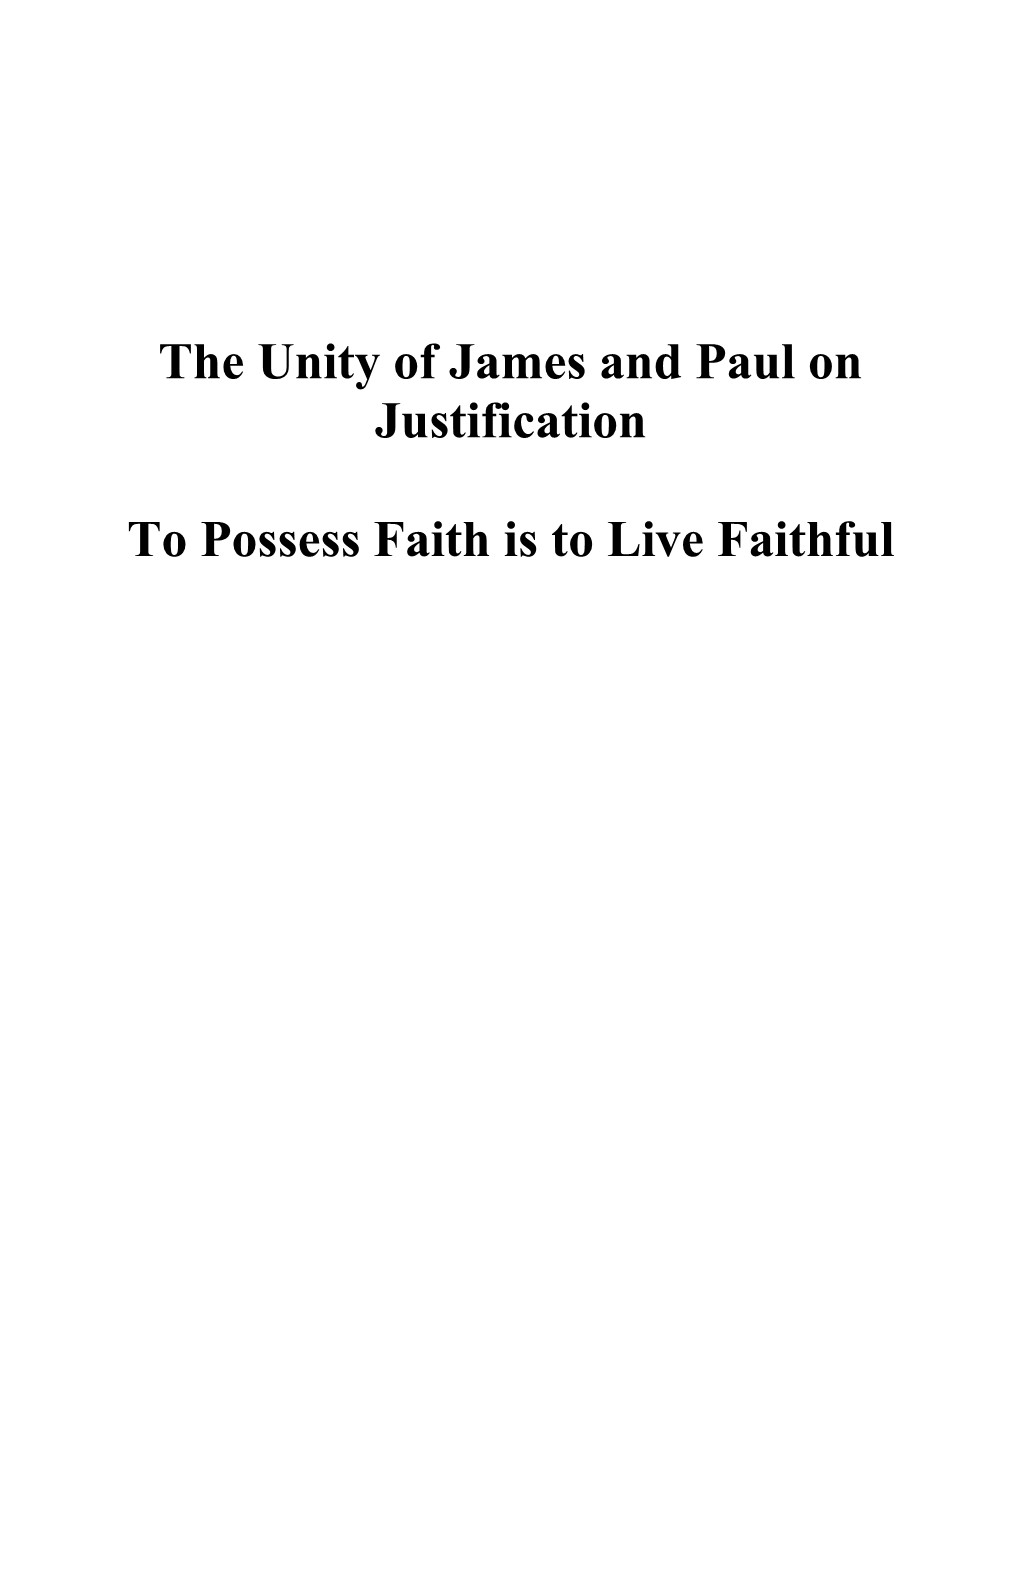 The Unity of James and Paul on Justification to Possess Faith Is to Live Faithful